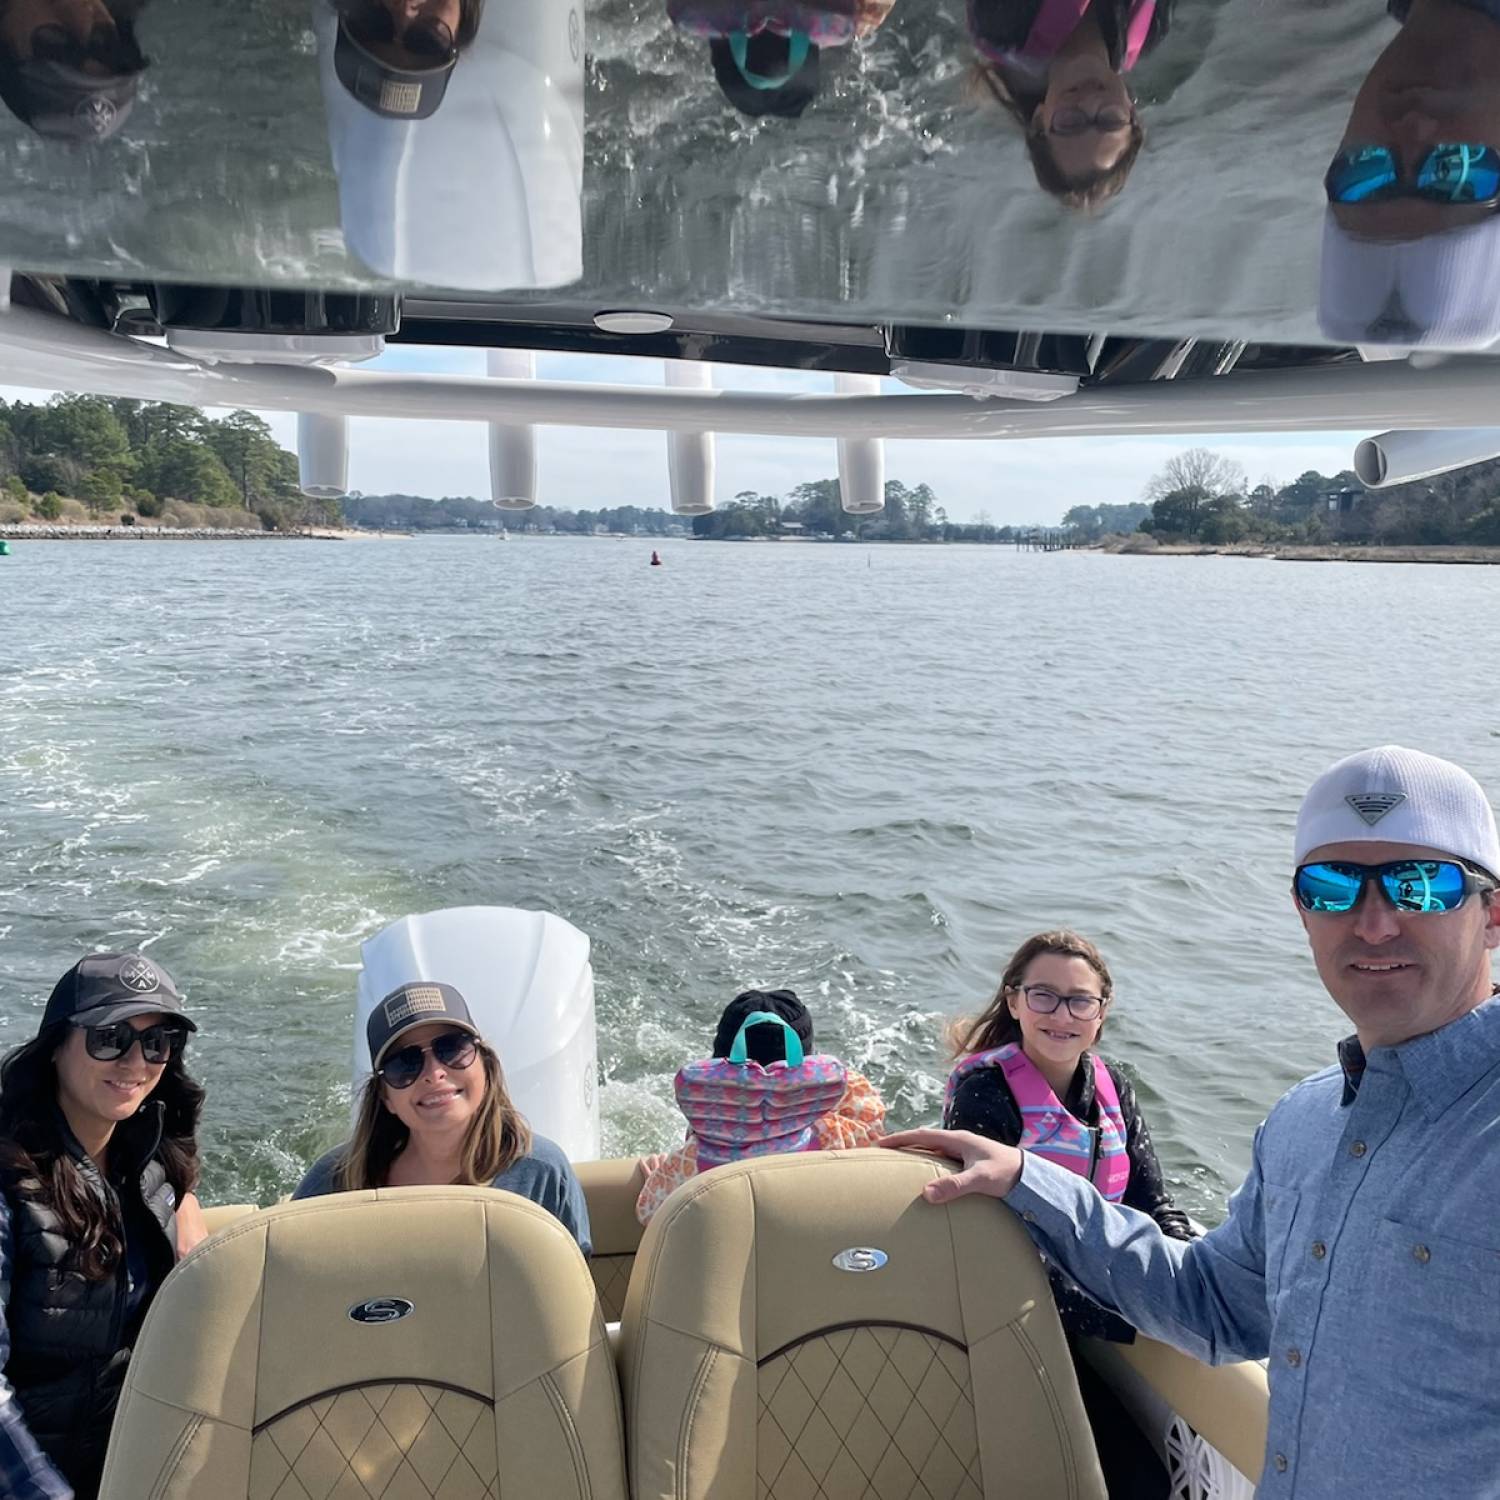 First trip out in our 2022 Heritage 231 with family and friends.